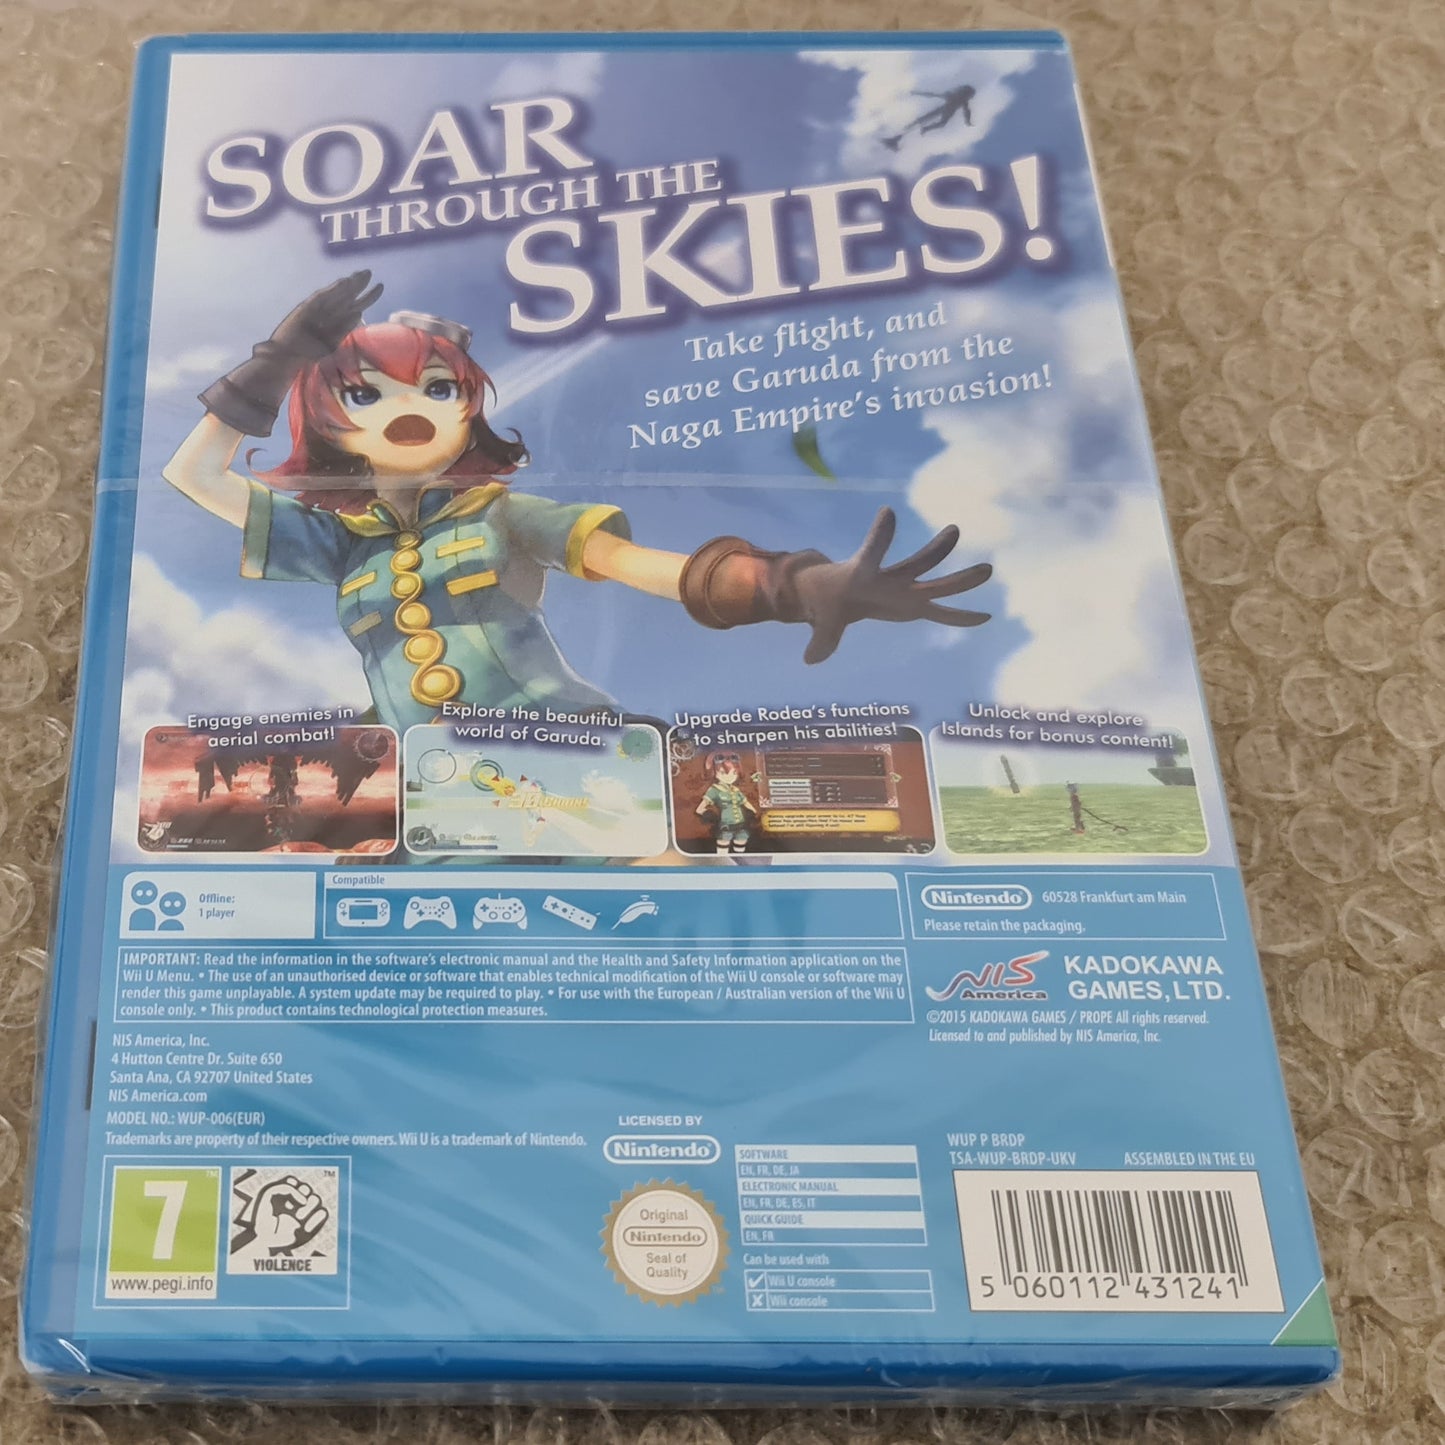 Brand New and Sealed Rodea The Sky Soldier Nintendo WiiU Game